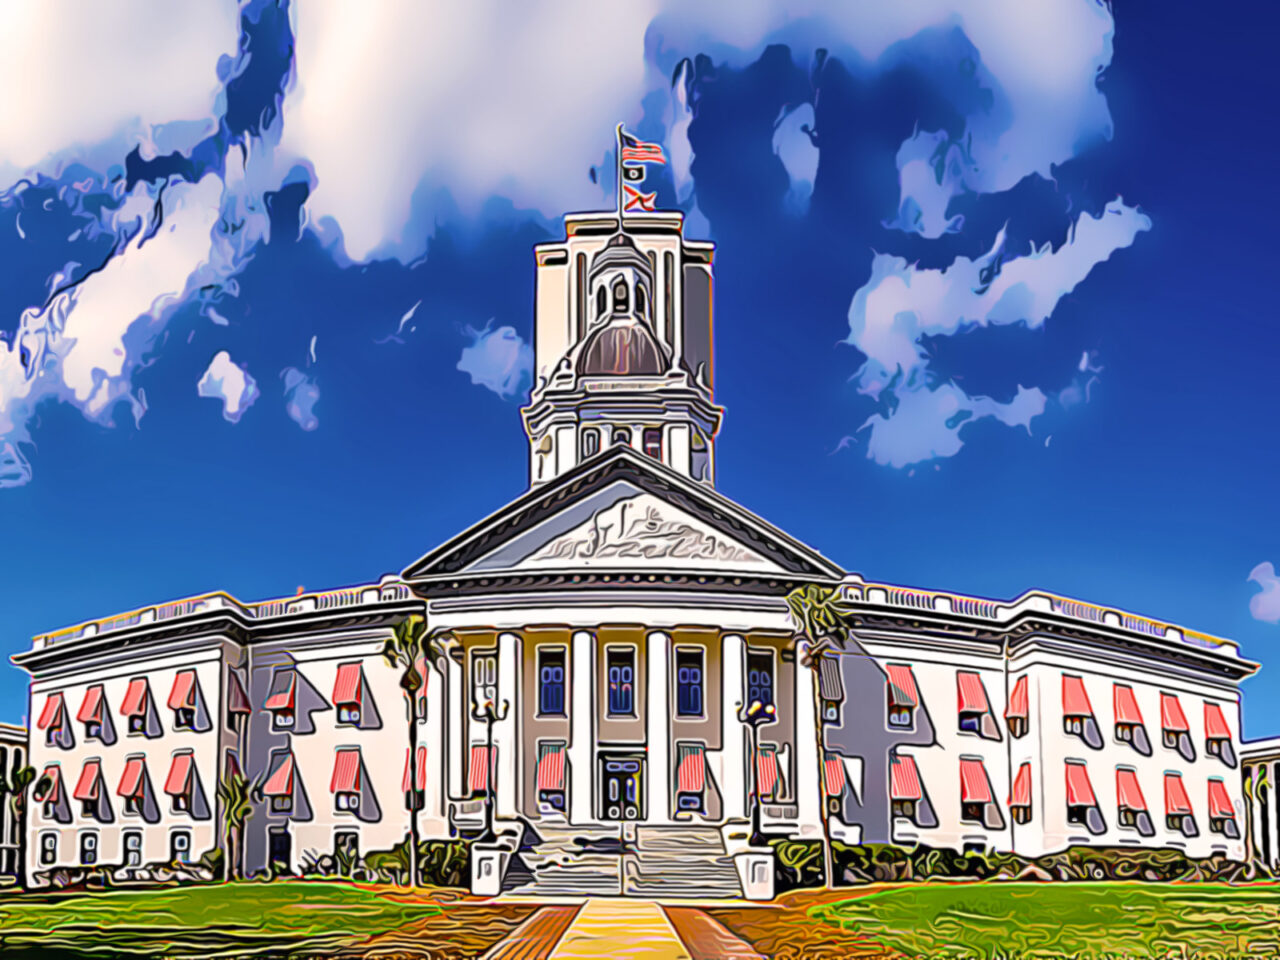 Historic Florida State Capitol Building with brightly colored st